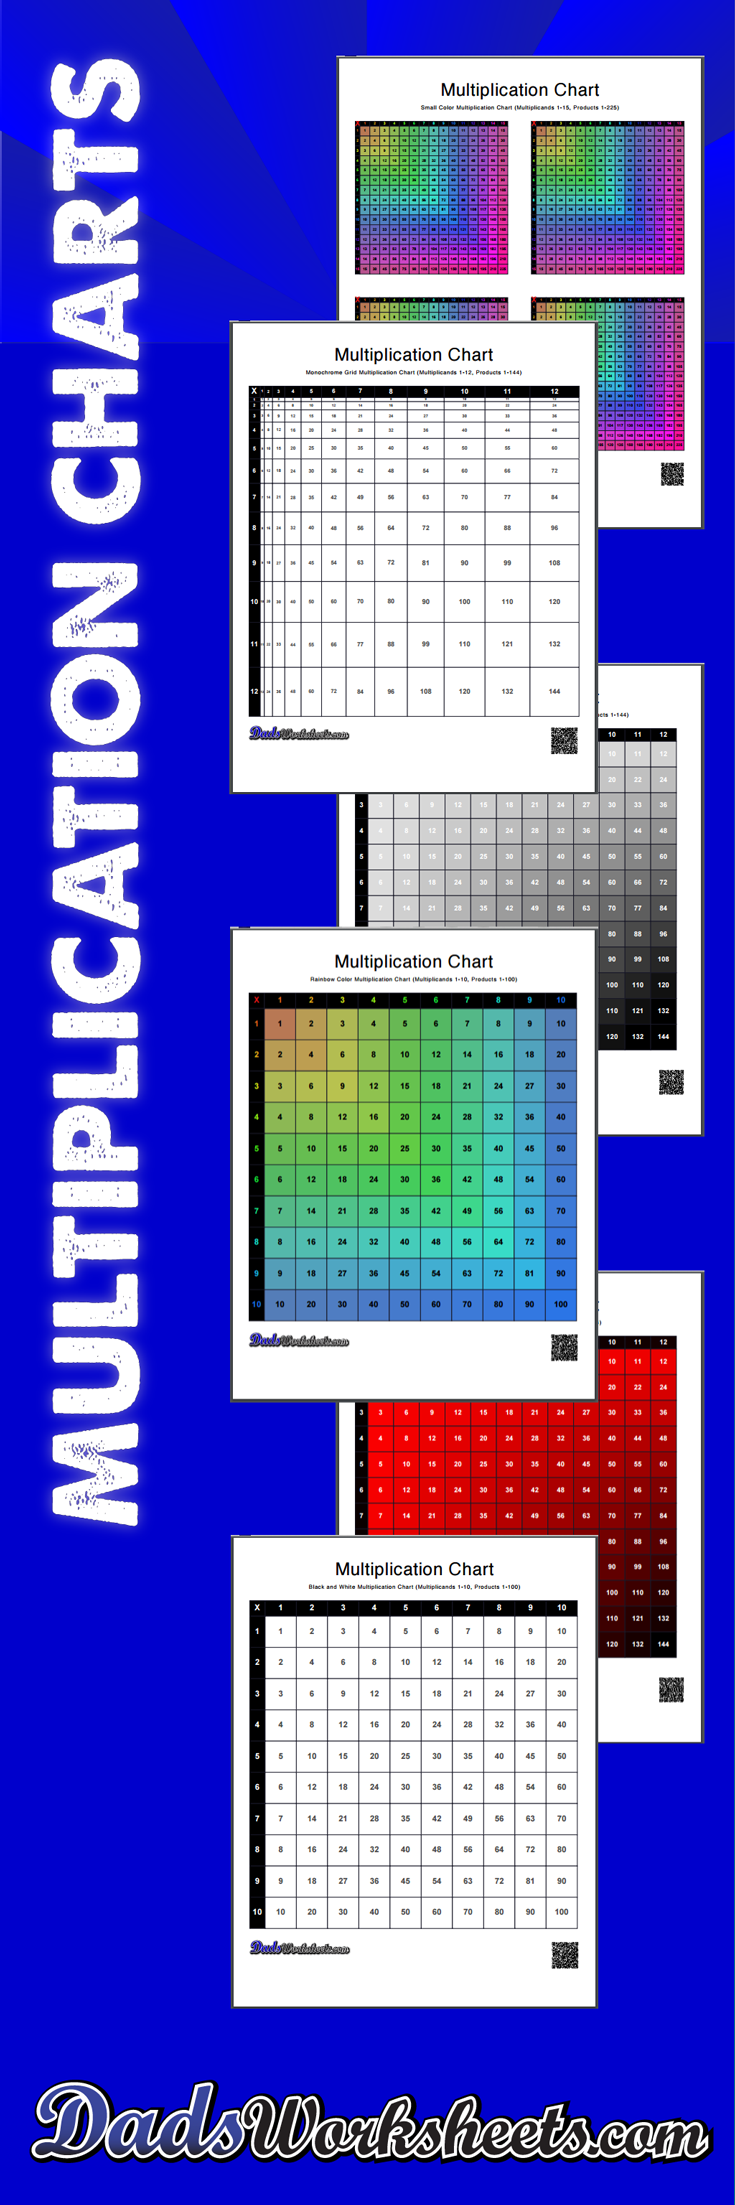 Multiplication Chart - Examples